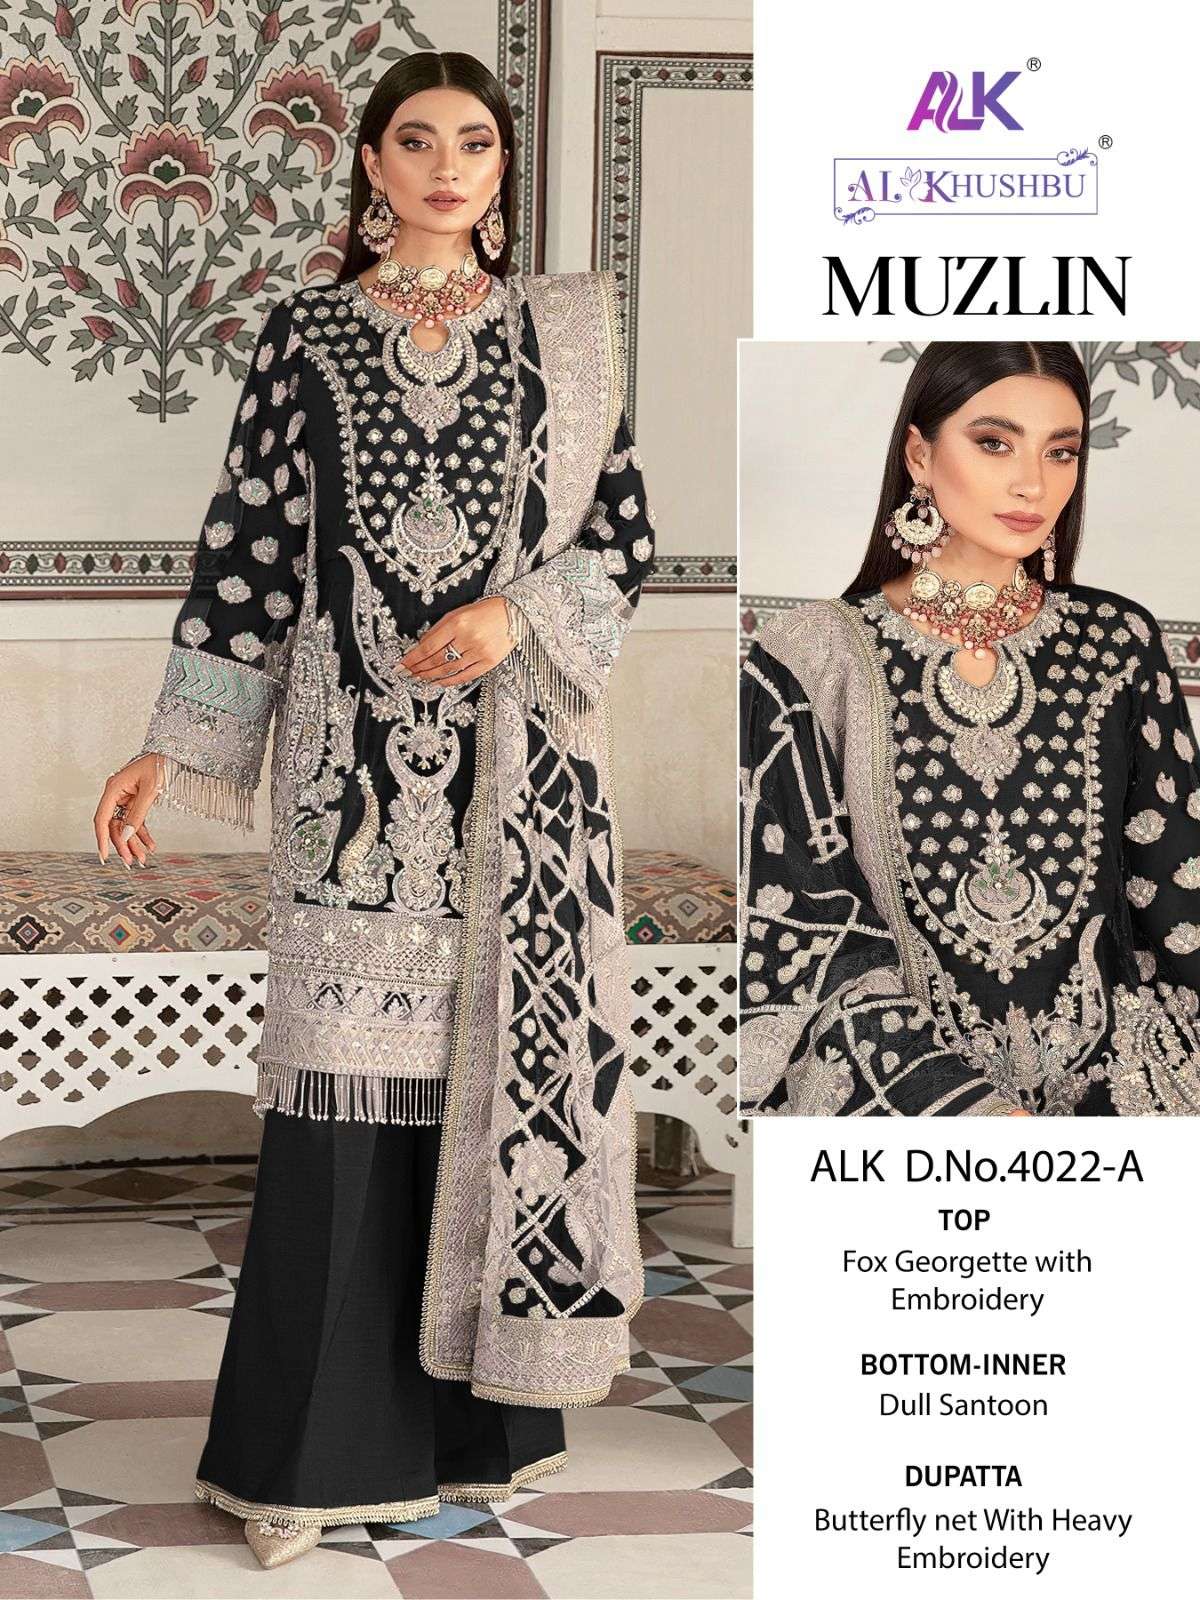 AL KHUSHBU MUZLIN VOL 1 GEORGETTE WITH HEAVY EMBROIDERED SUI...